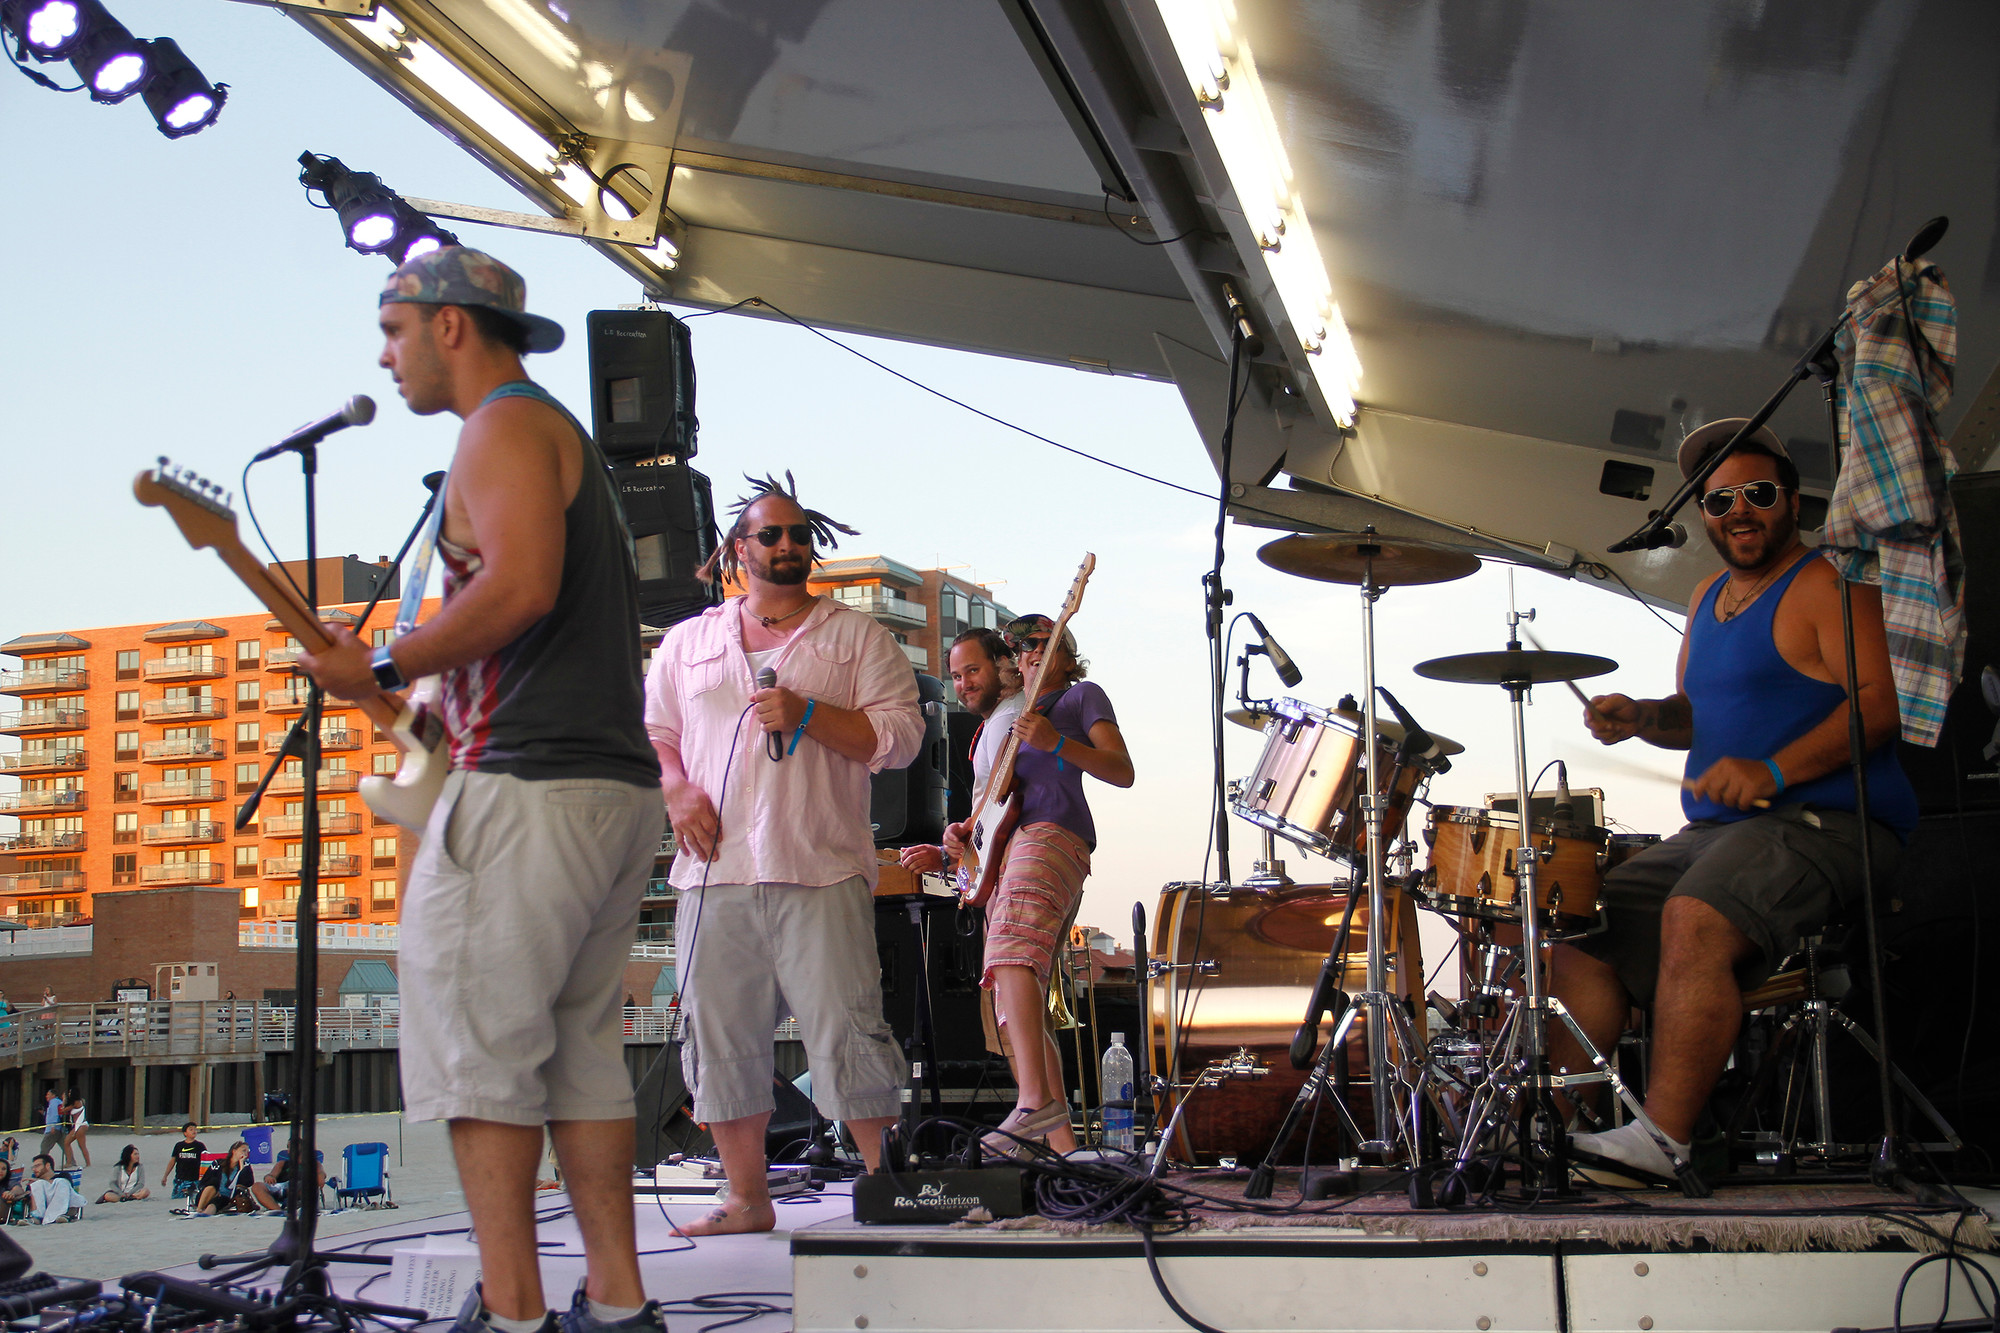 Long Island reggae band Oogee Wawa performed, along with numerous other musical acts.